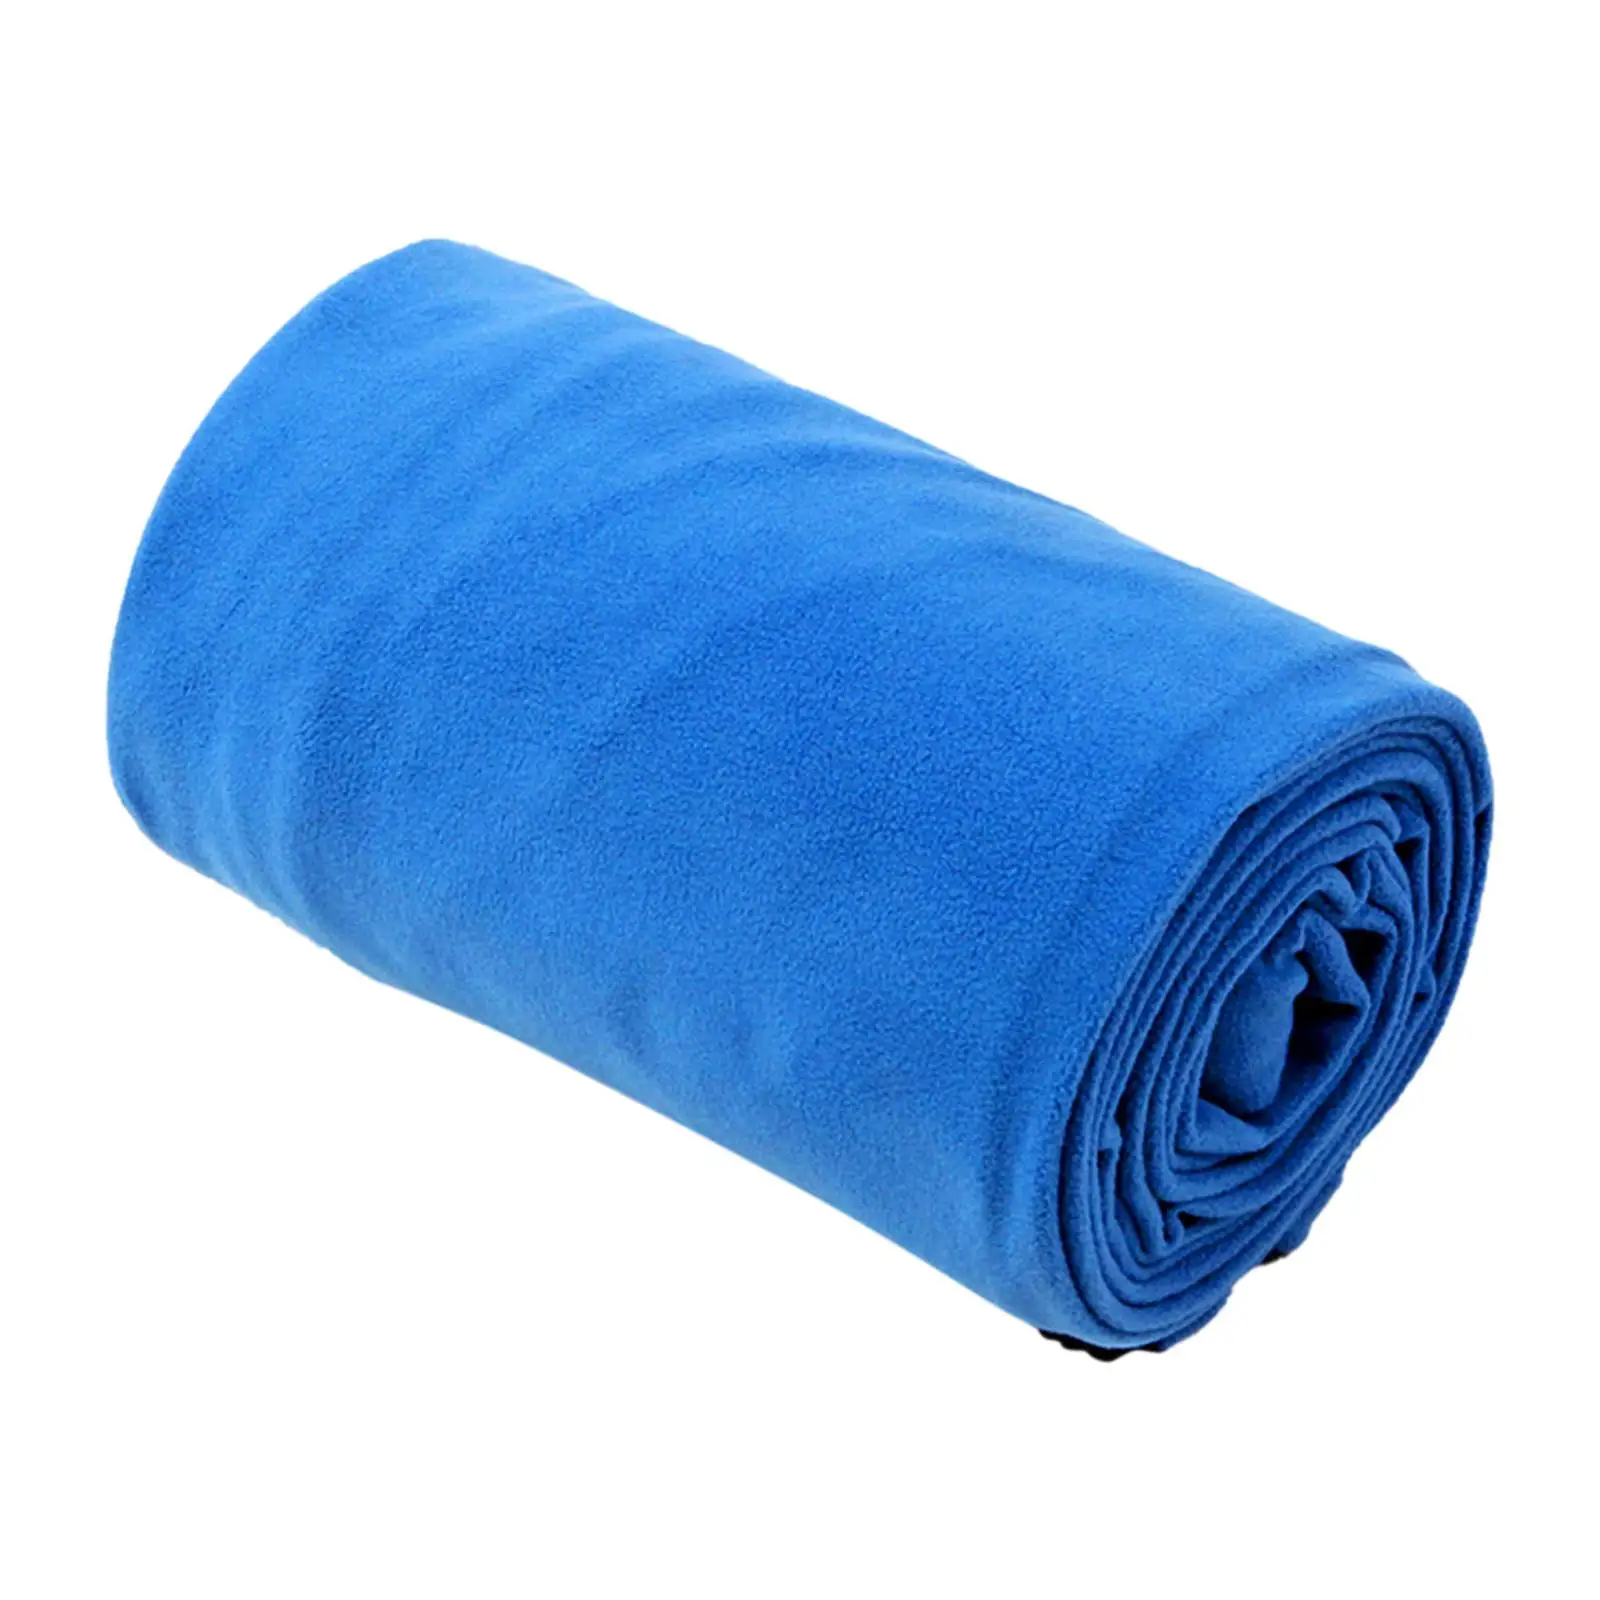 Lightweight Camping Blanket Thermal Outdoor Emergency Soft Fleece Sleeping Bag Liner for Sports Hiking Business Picnic Travel